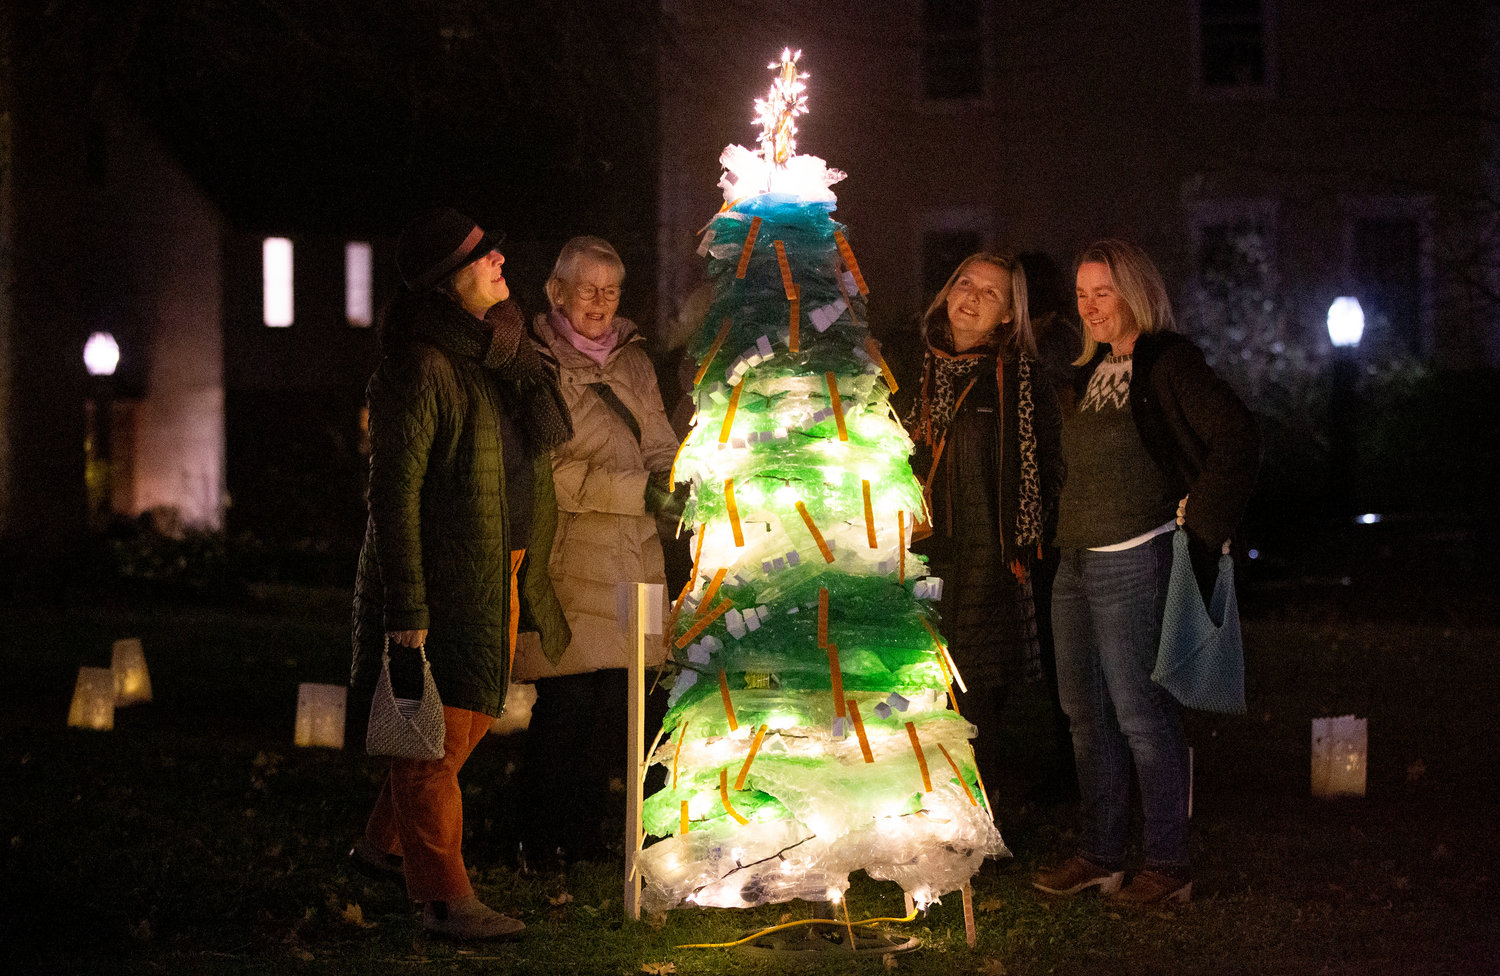 Kate Filloramo (left), Anne Hauzer, Jade Gilchrist and Michelle Leys check out a tree.